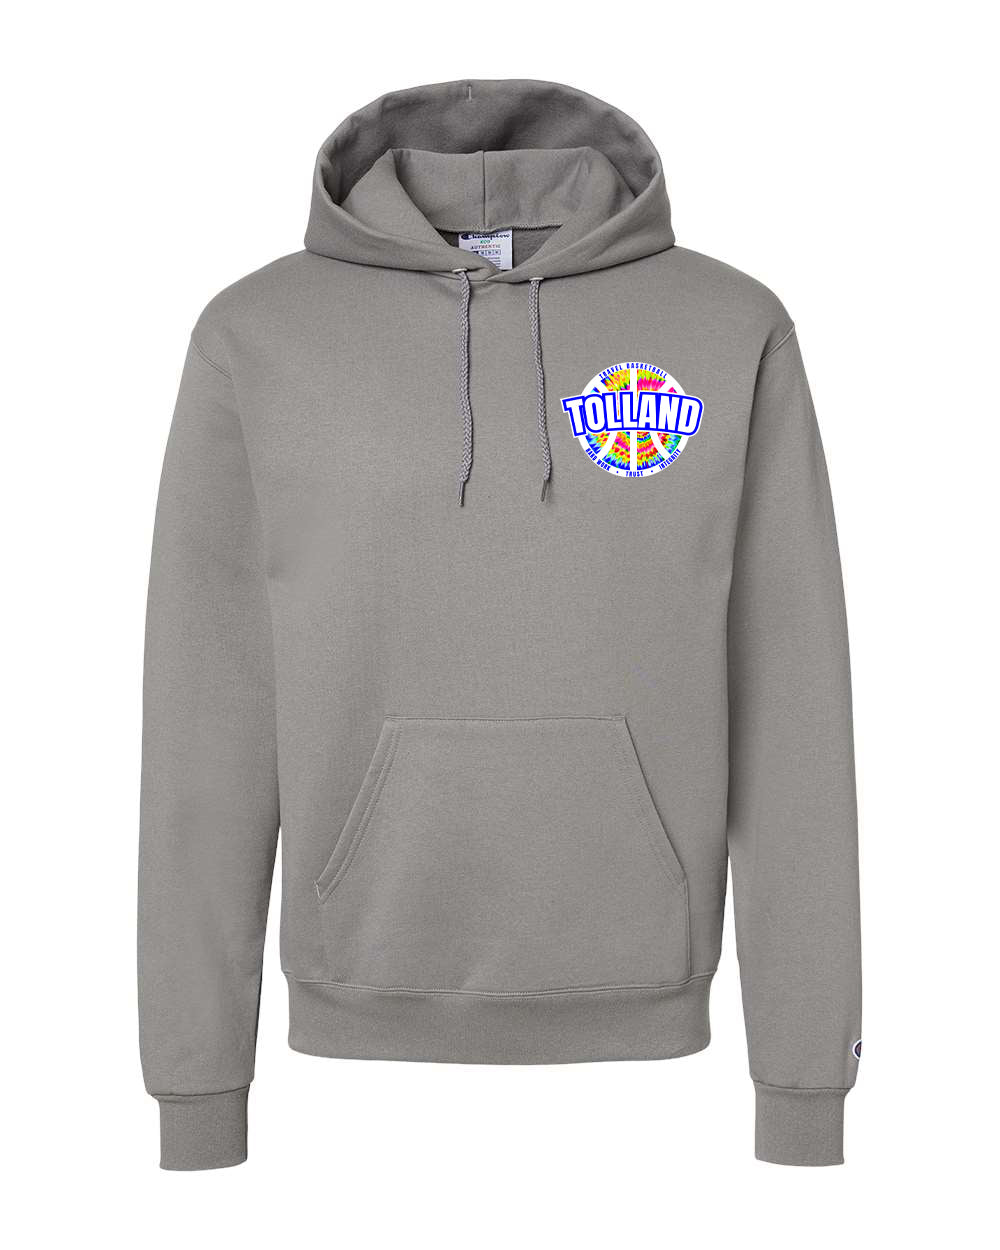 Tolland TB Adult Champion Hoodie "Tye Dye Corner" - S700 (color options available)